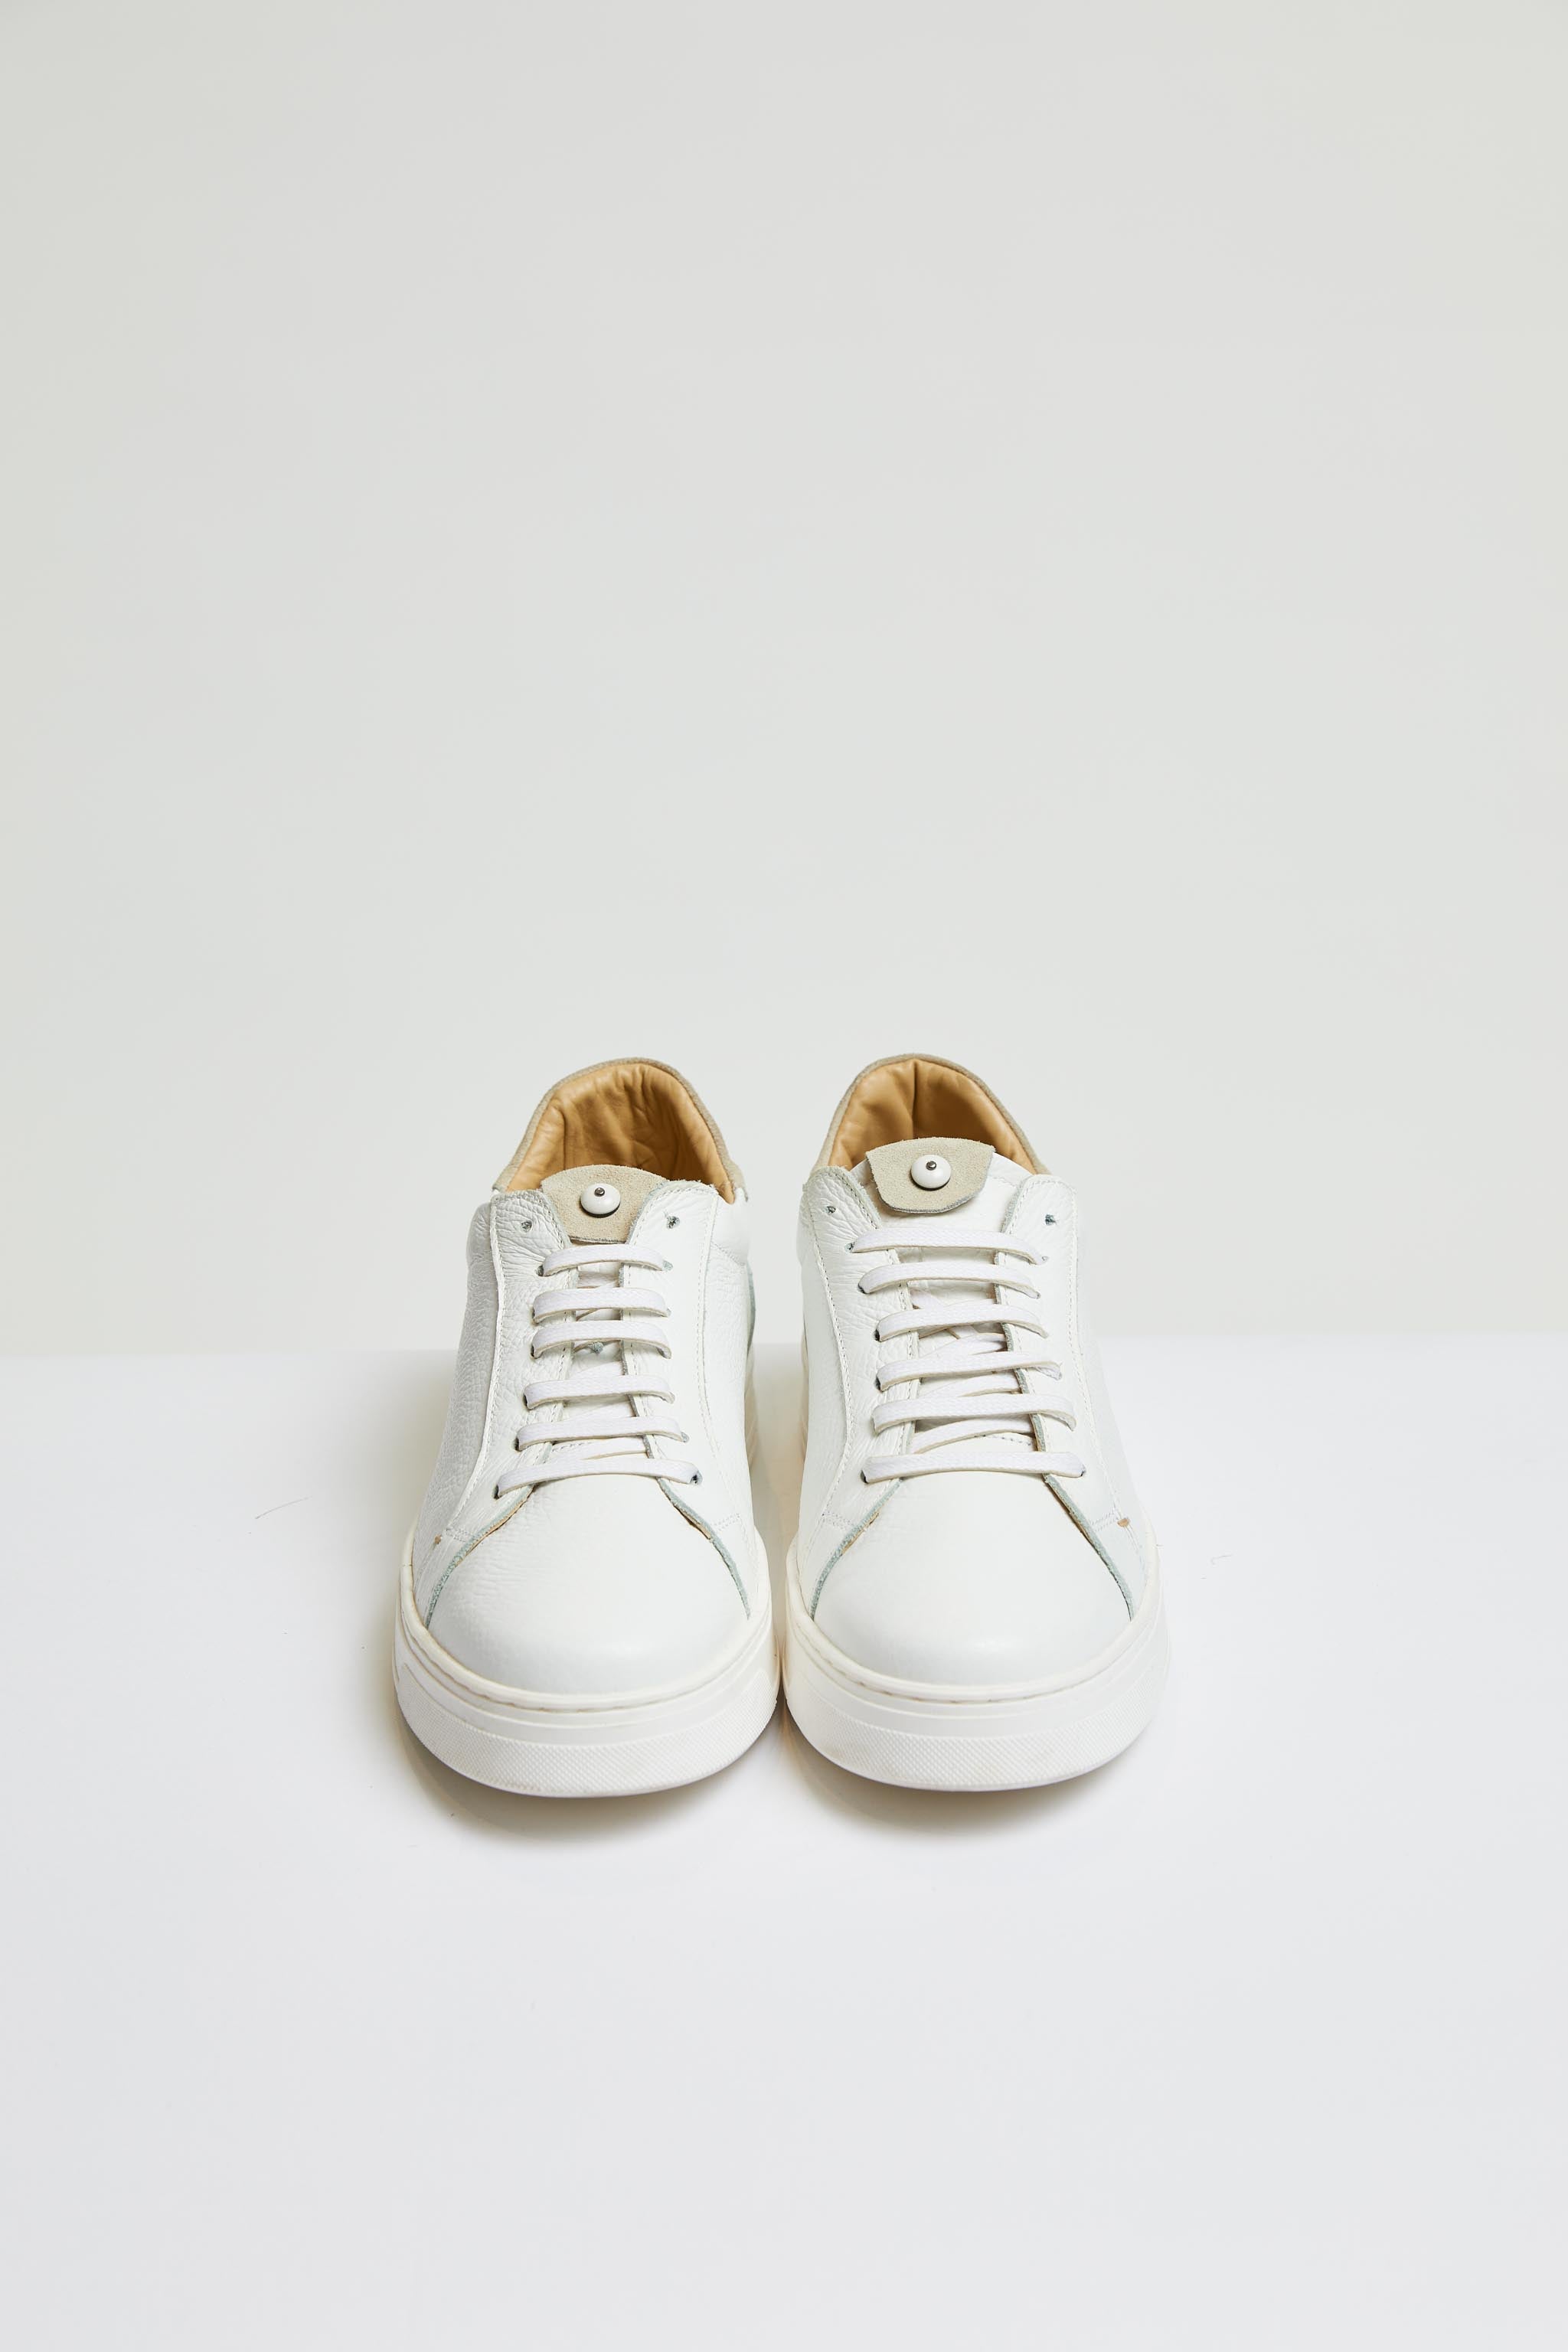 retro-styled tennis shoe in sand